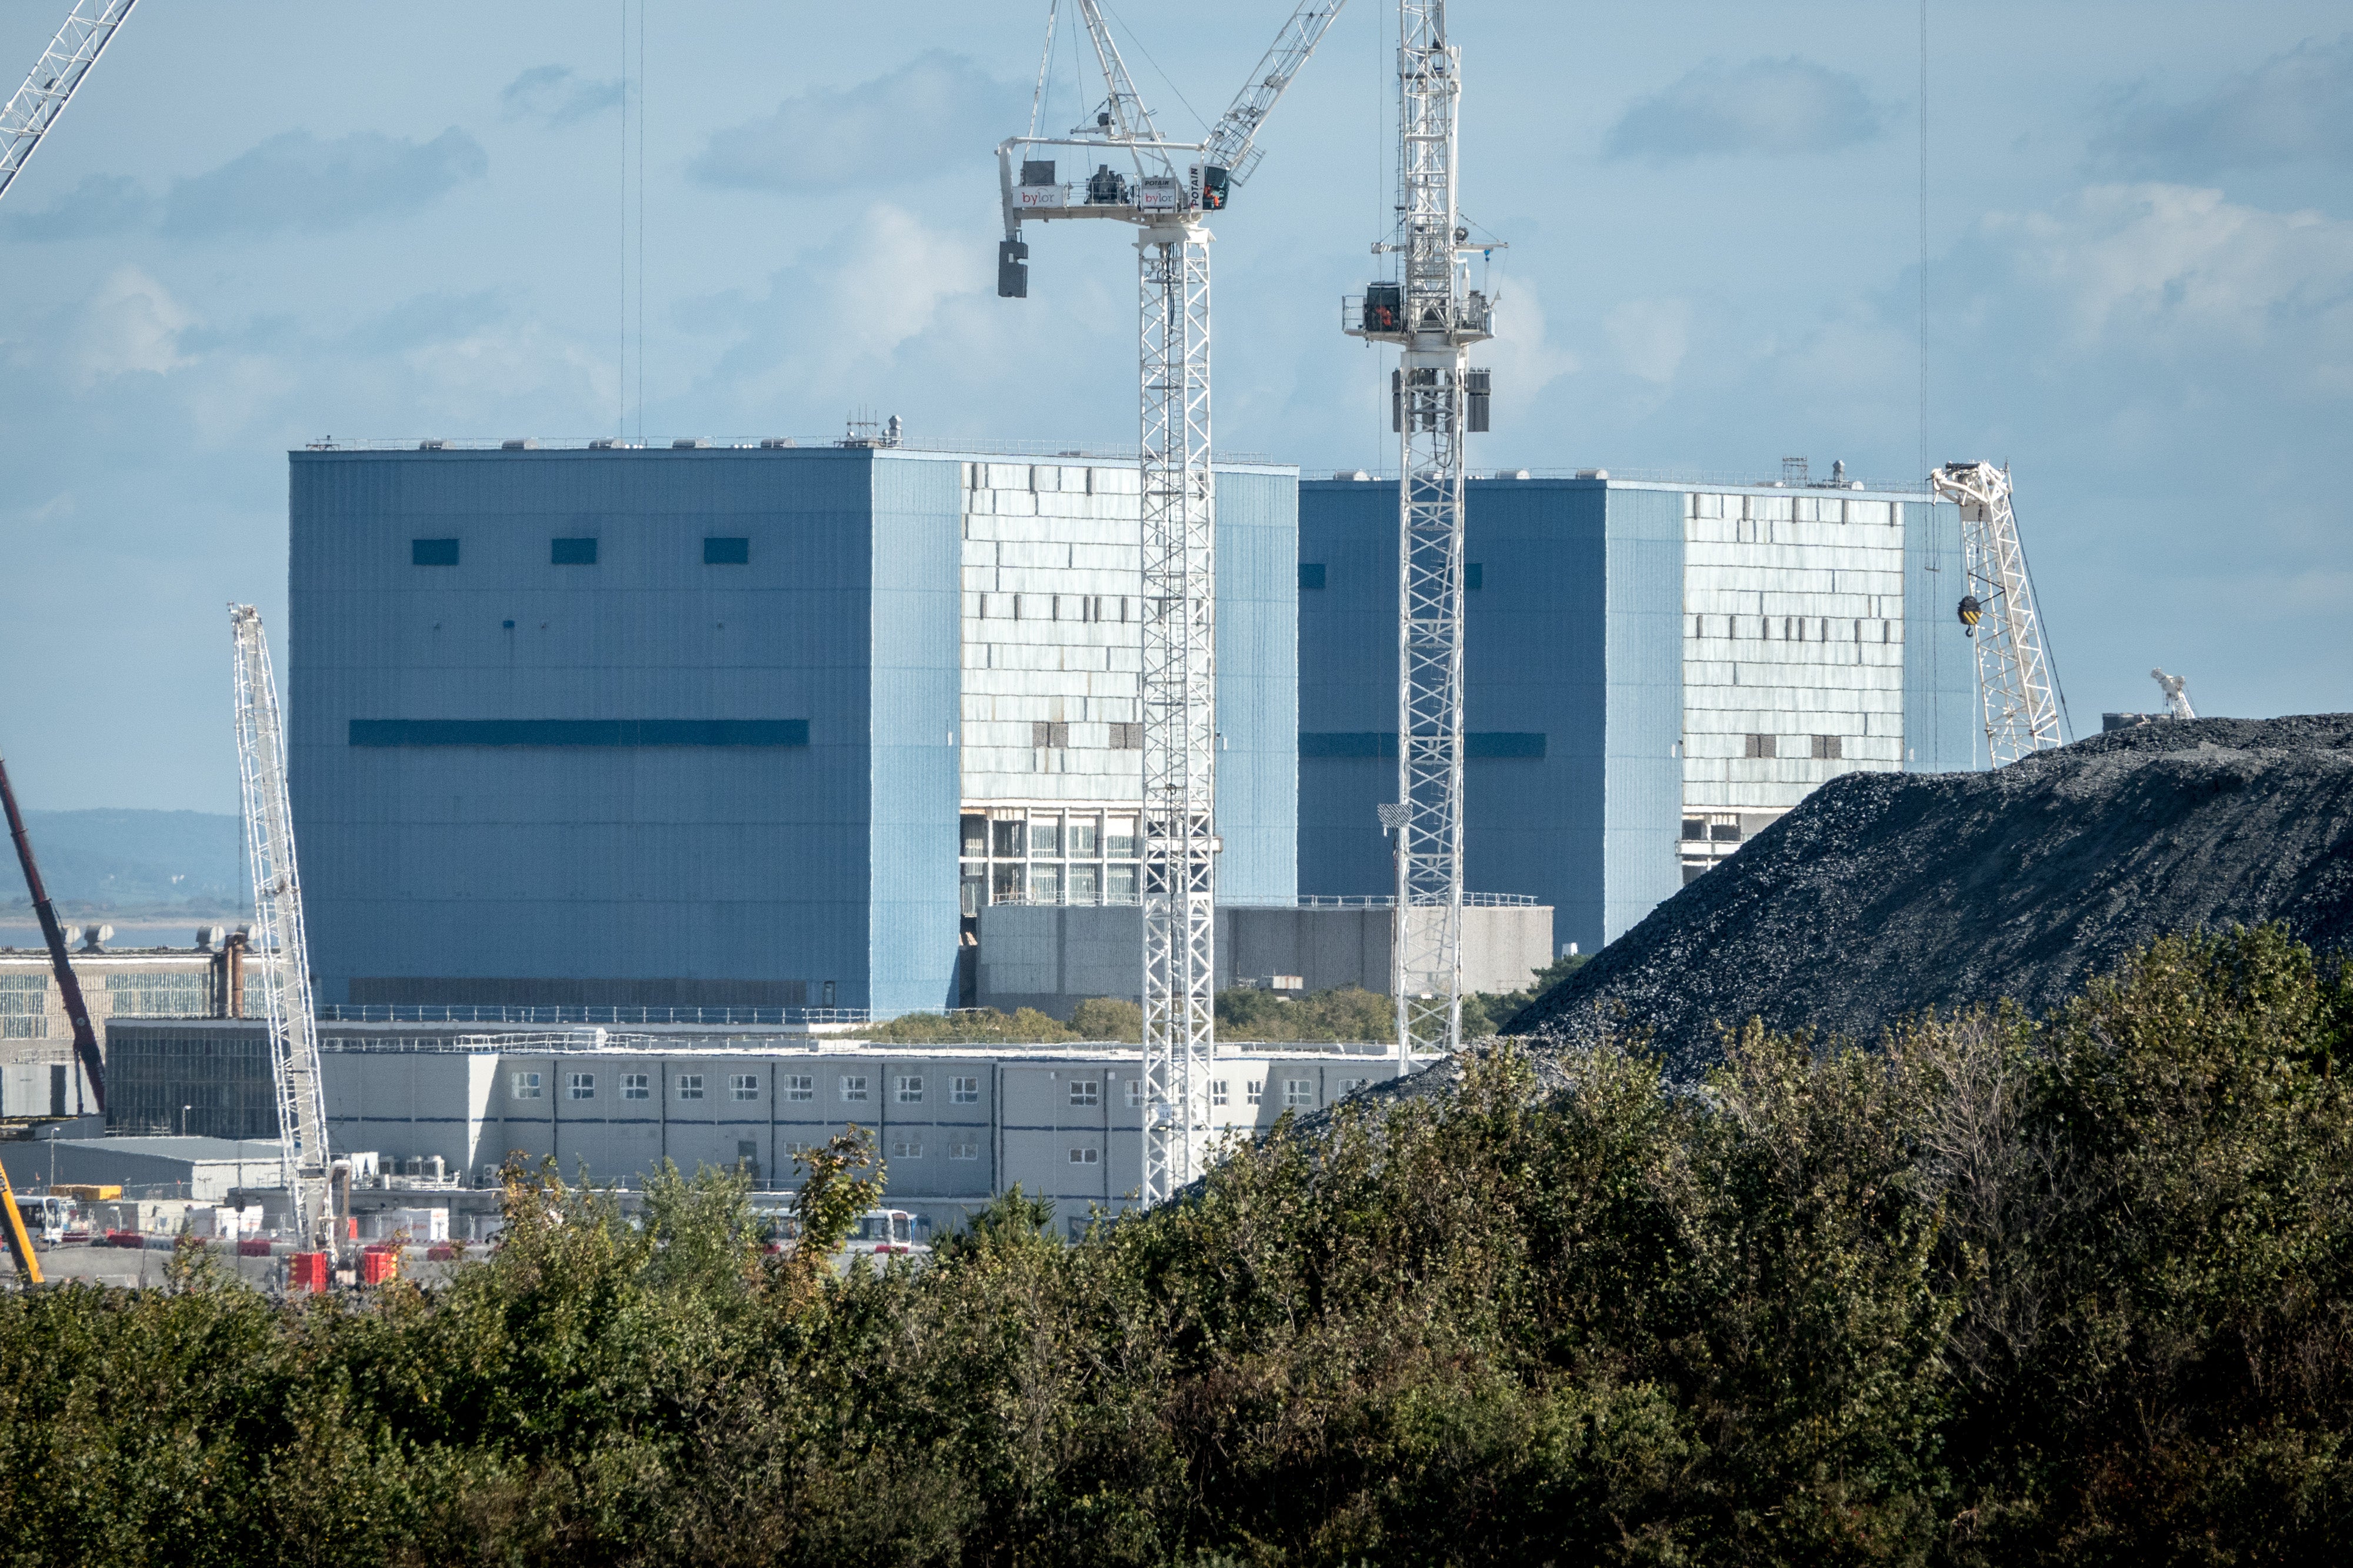 While elephant: The long delayed Hinkley Point C power plant which is finally getting built